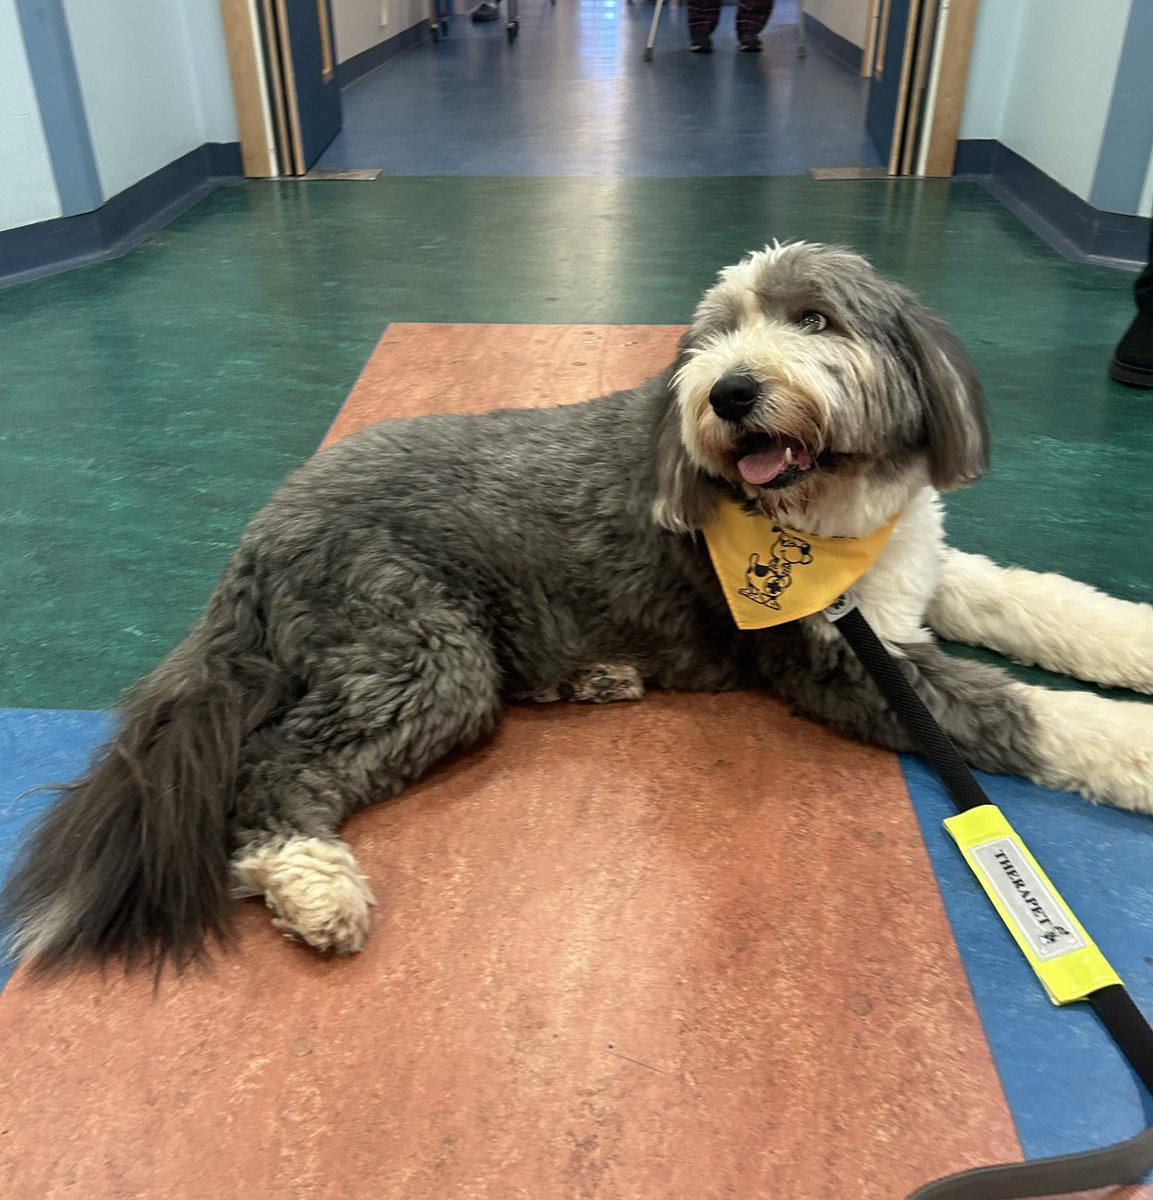 Lots of smiles in @204rie when Teddy the bearded collie came to visit us. We can’t wait to see you again 💙 @NHSLVolunteers @juliet_turk @CanineConcern @karenhendry50